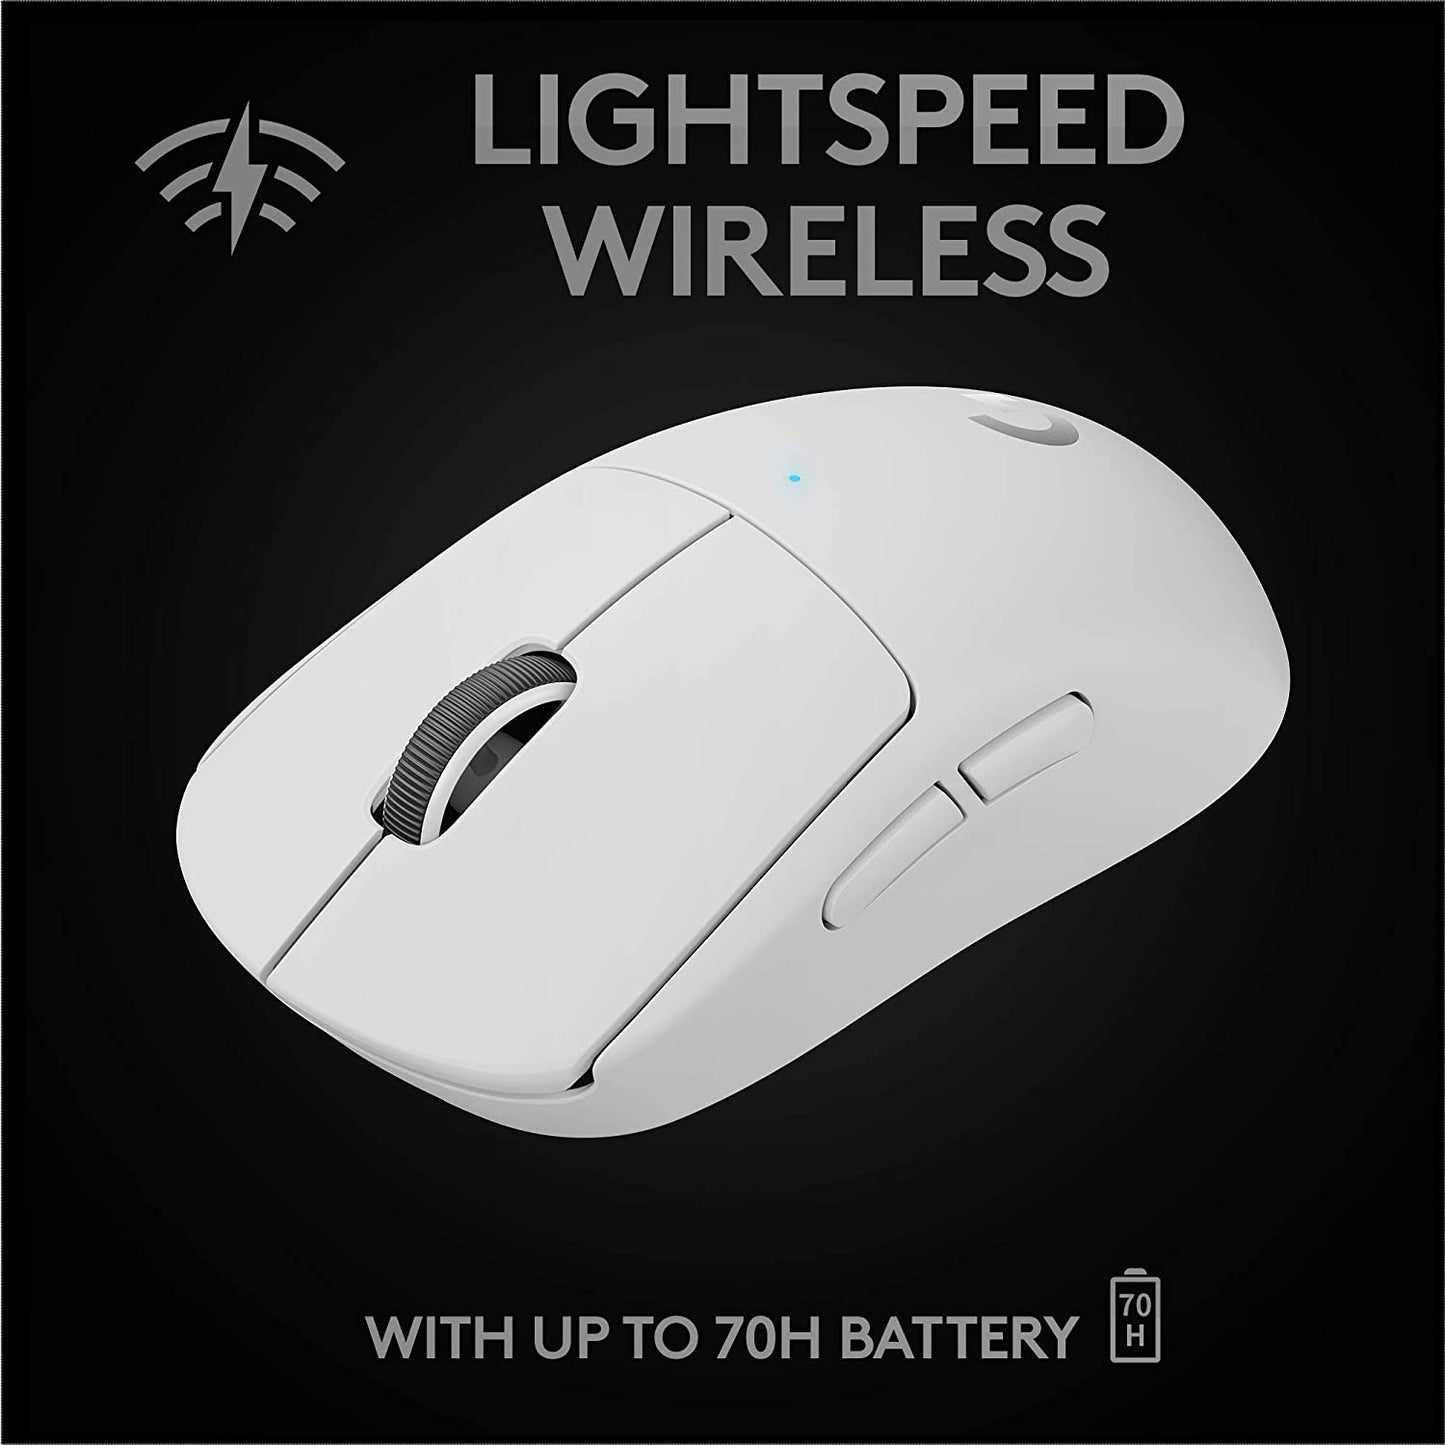 G PRO X SUPERLIGHT Wireless Gaming Mouse, Ultra-Lightweight, HERO 25K Sensor, 25,600 DPI, 5 Programmable Buttons, Long Battery Life, Compatible with PC / Mac - White